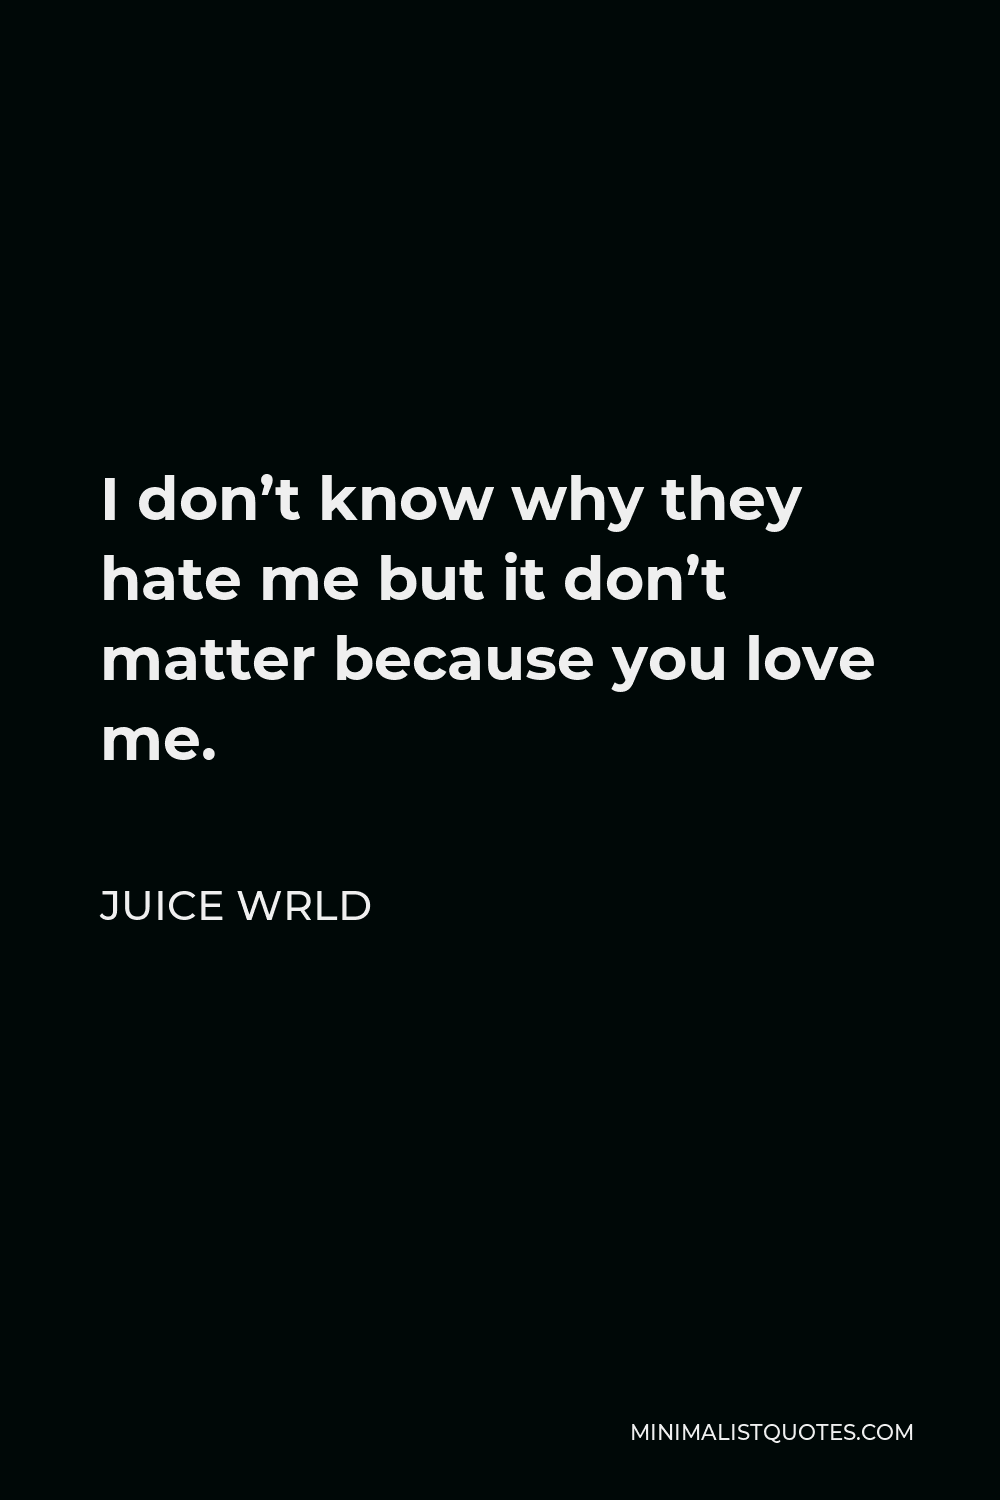 Juice Wrld Quote - I don’t know why they hate me but it don’t matter because you love me.